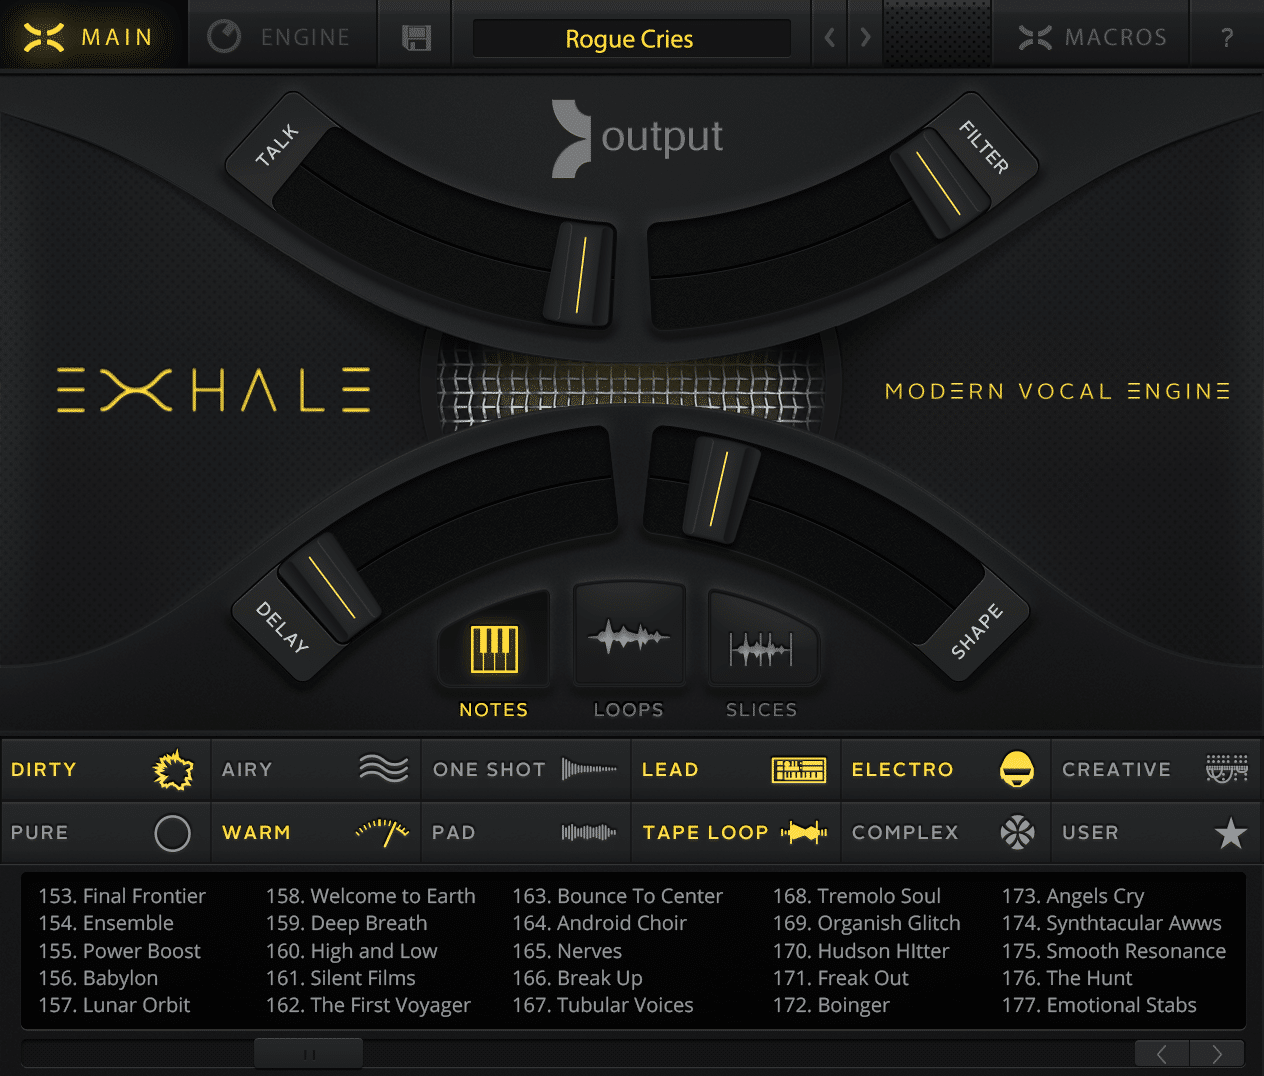 The Kontakt Library "Exhale" by Output